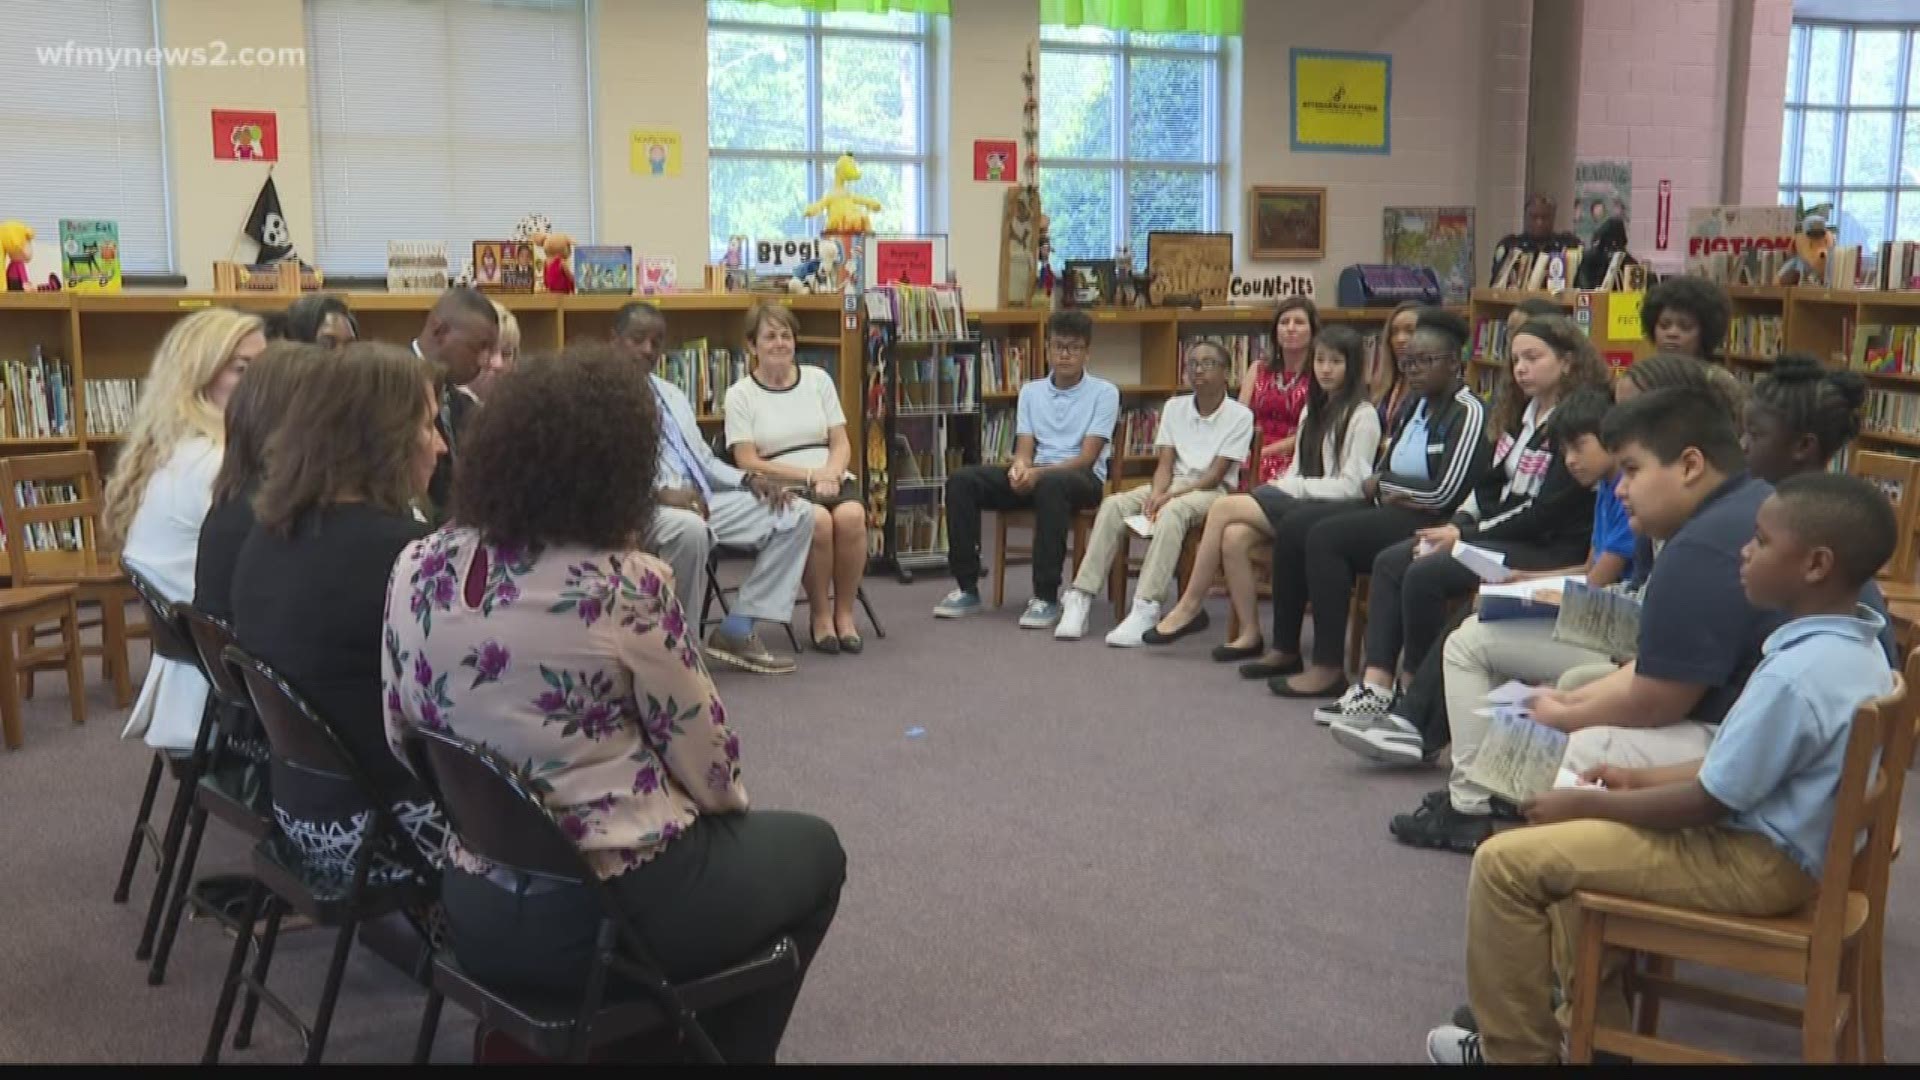 Supreme Court Justice Cheri Beasley is making rounds at schools across the state to discuss challenges students and teachers are facing in their communities. Monday she was in Winston-Salem.